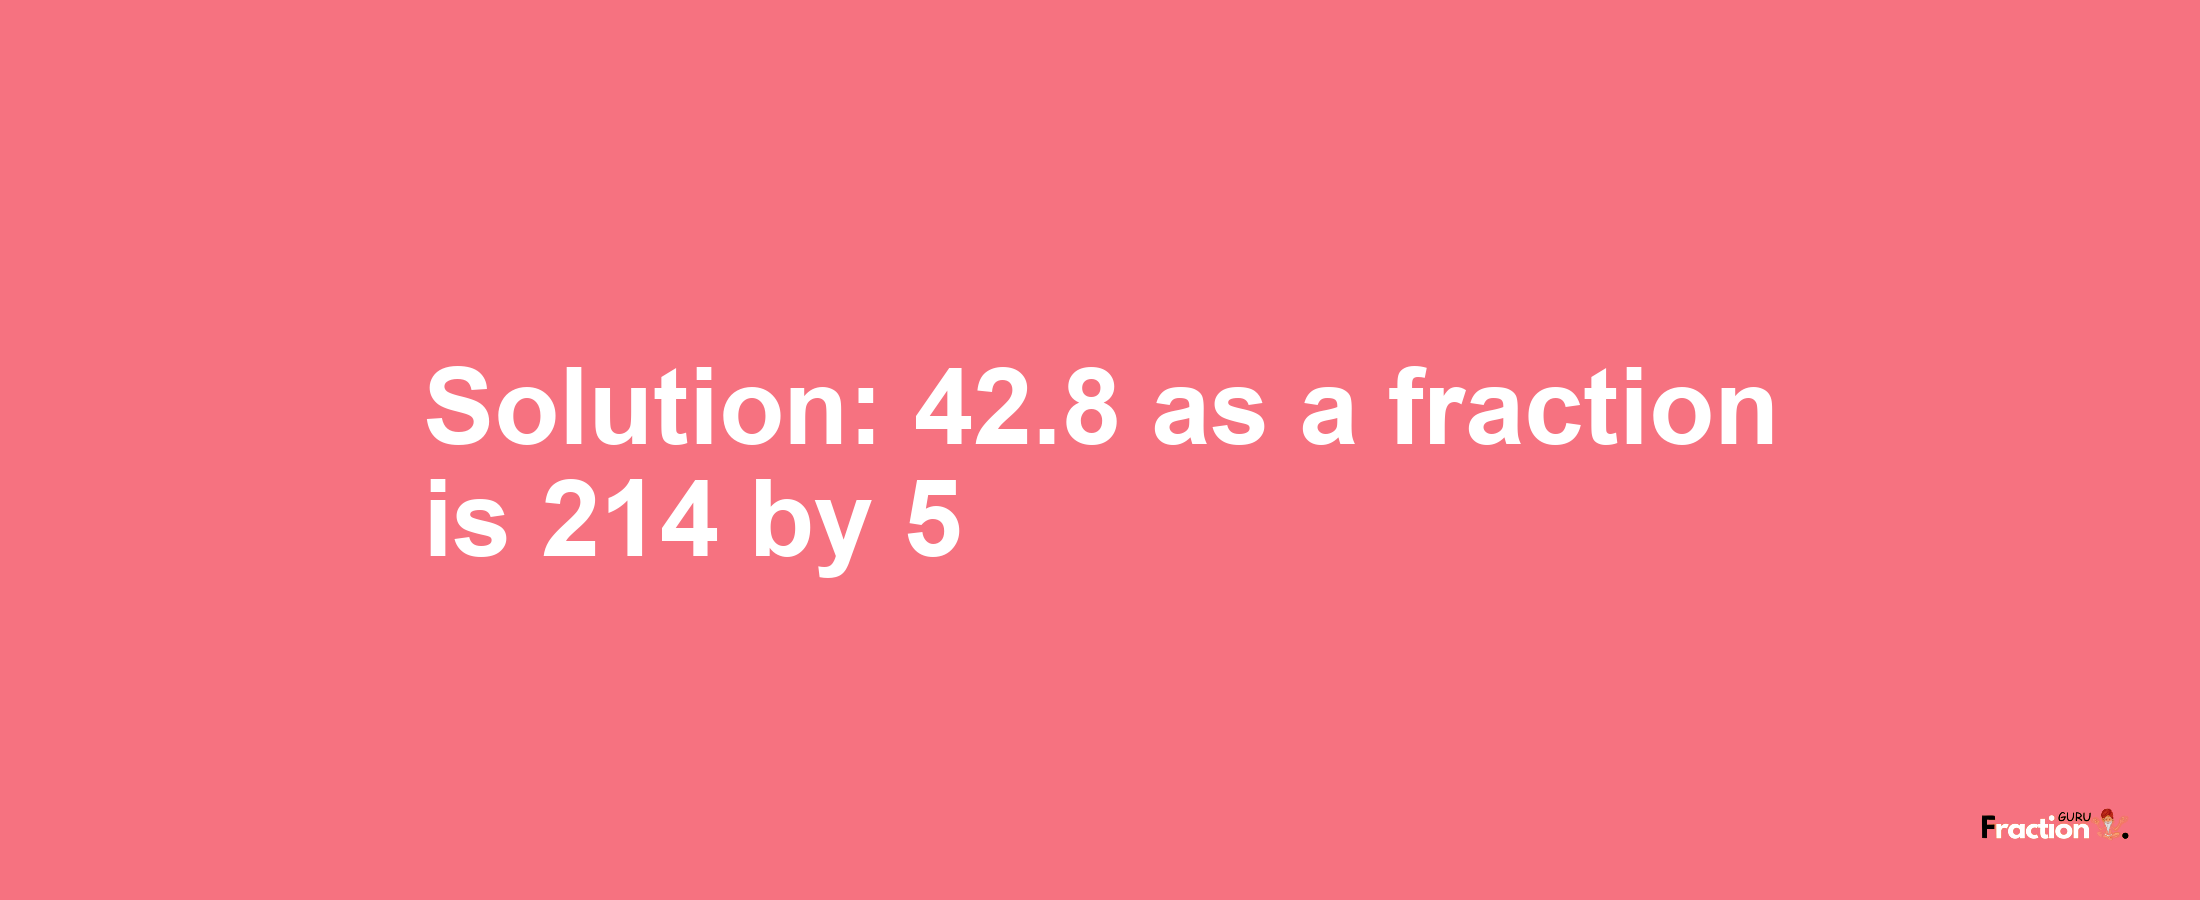 Solution:42.8 as a fraction is 214/5